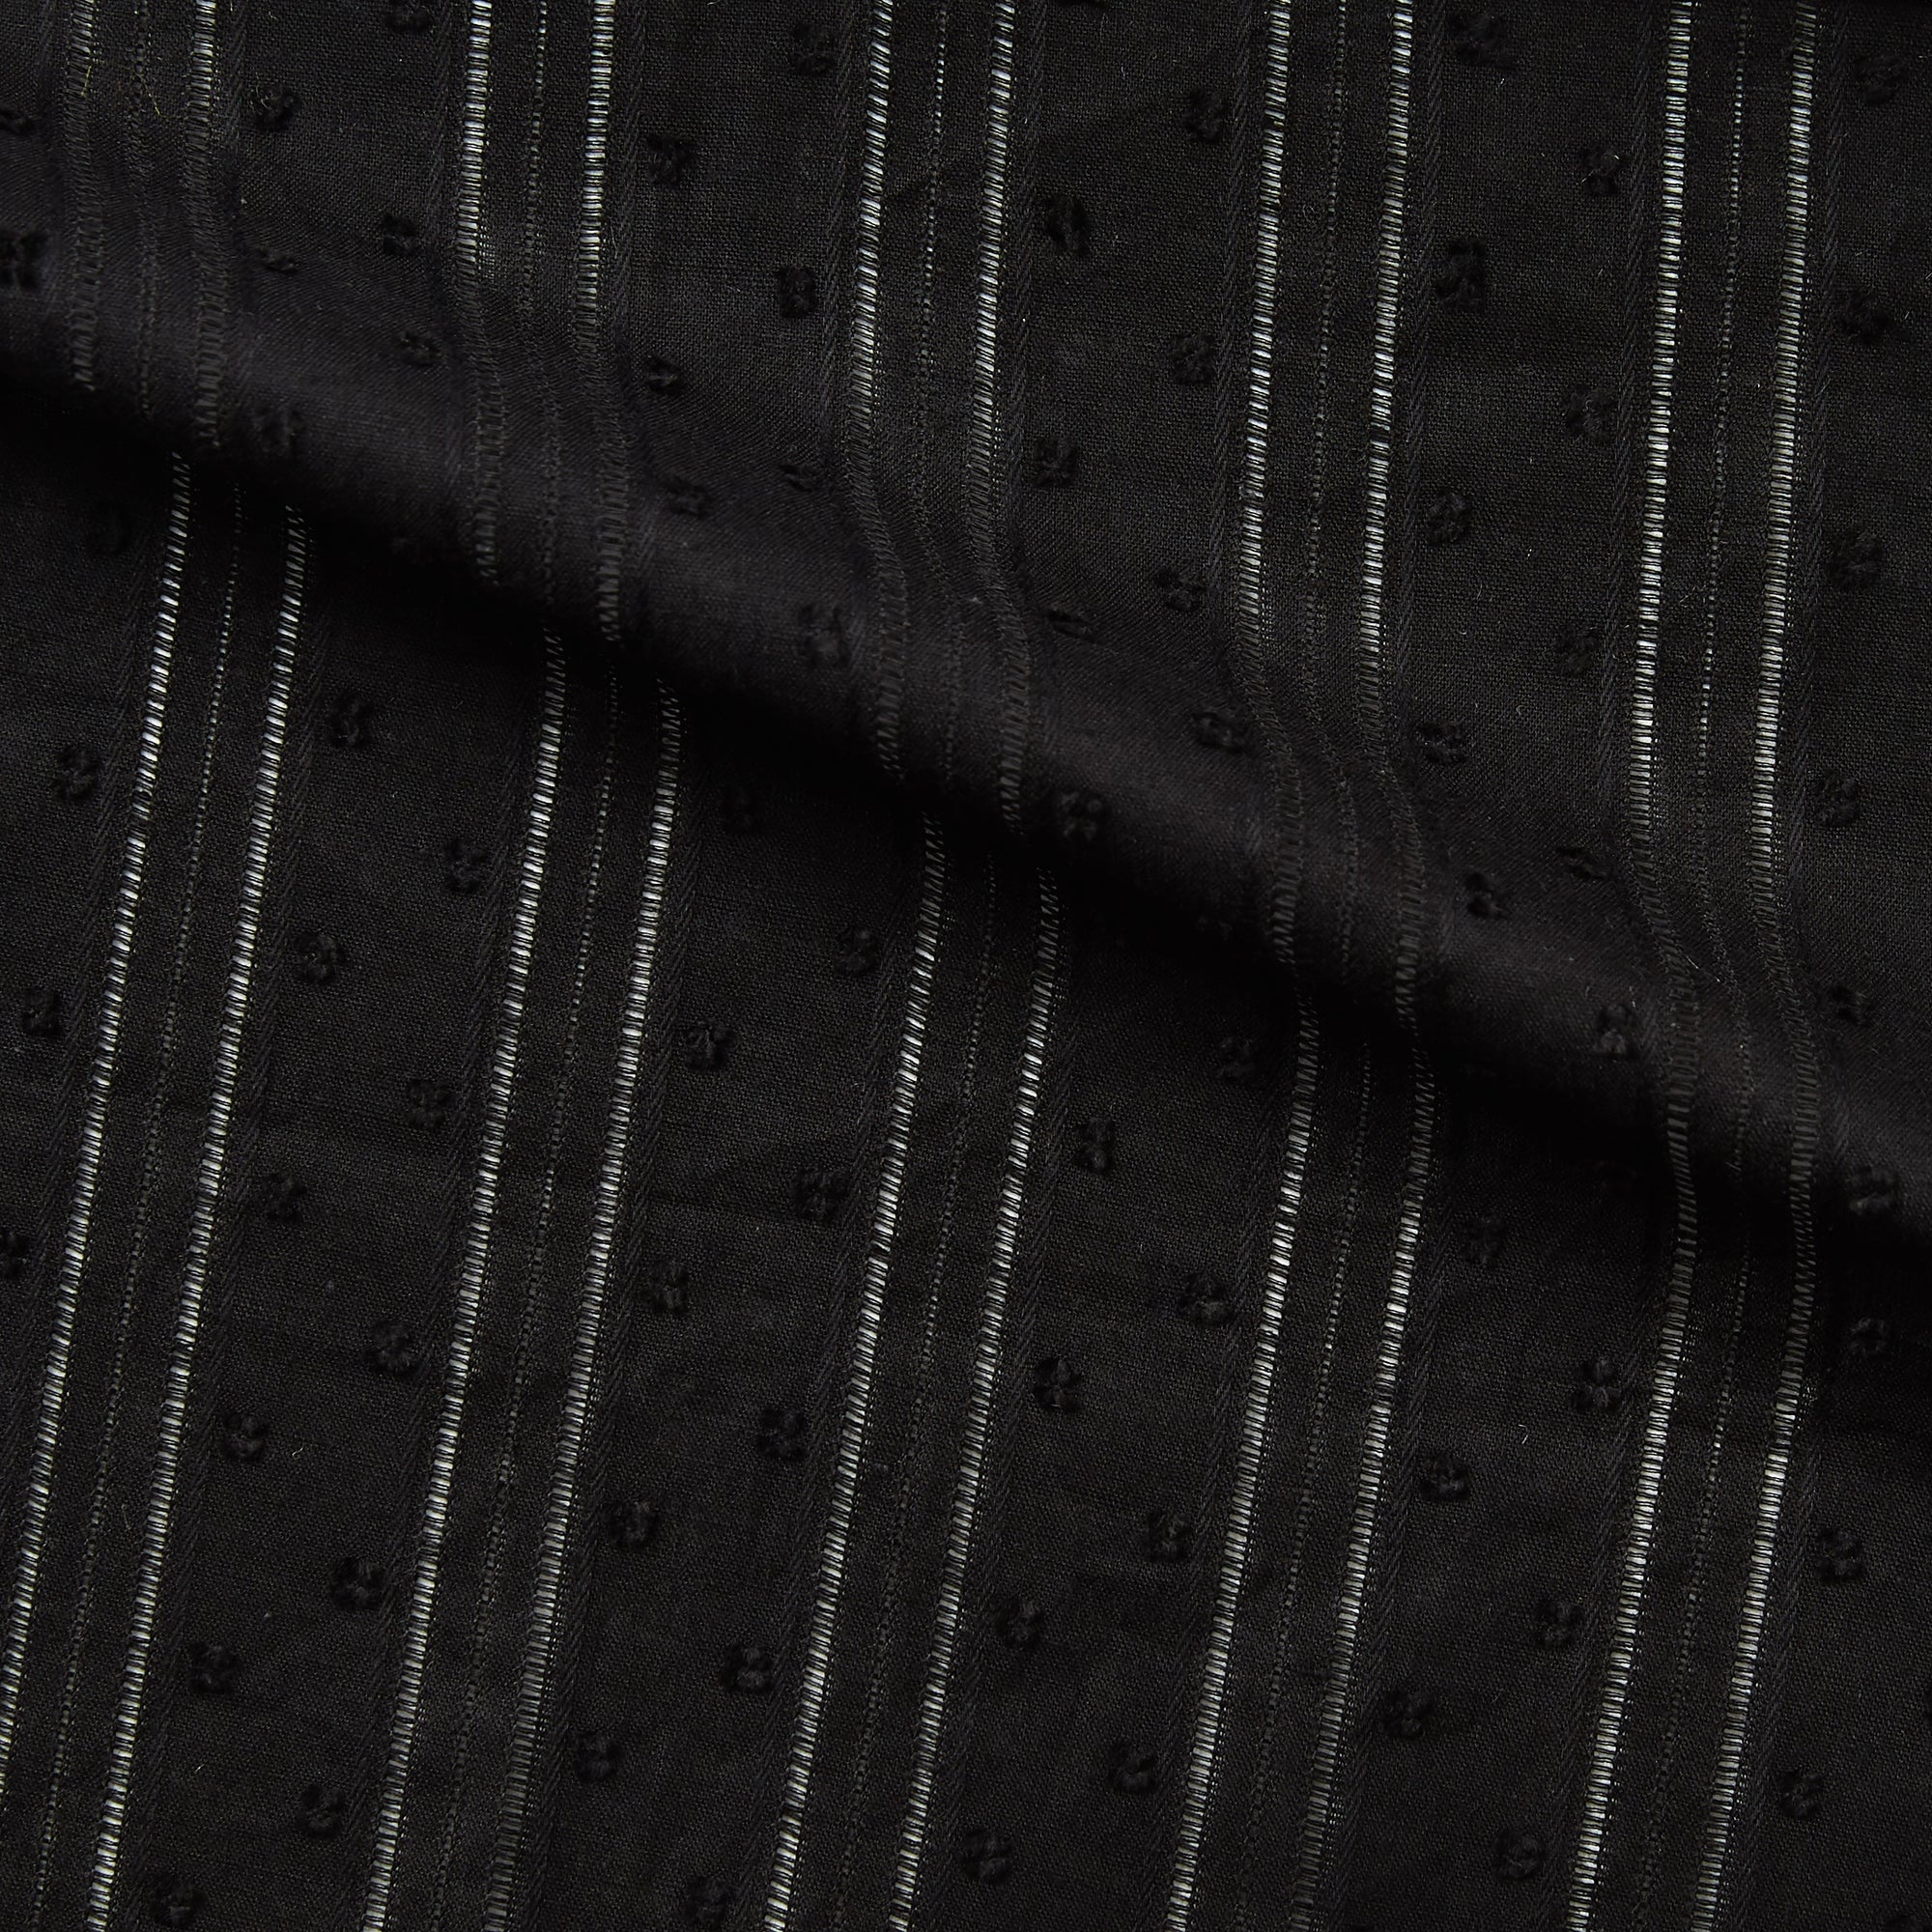 Presenting Hailspot a Black colored base of a breathable soft pure cotton voile with elegant drop stitch stripes and tuft spot textured face